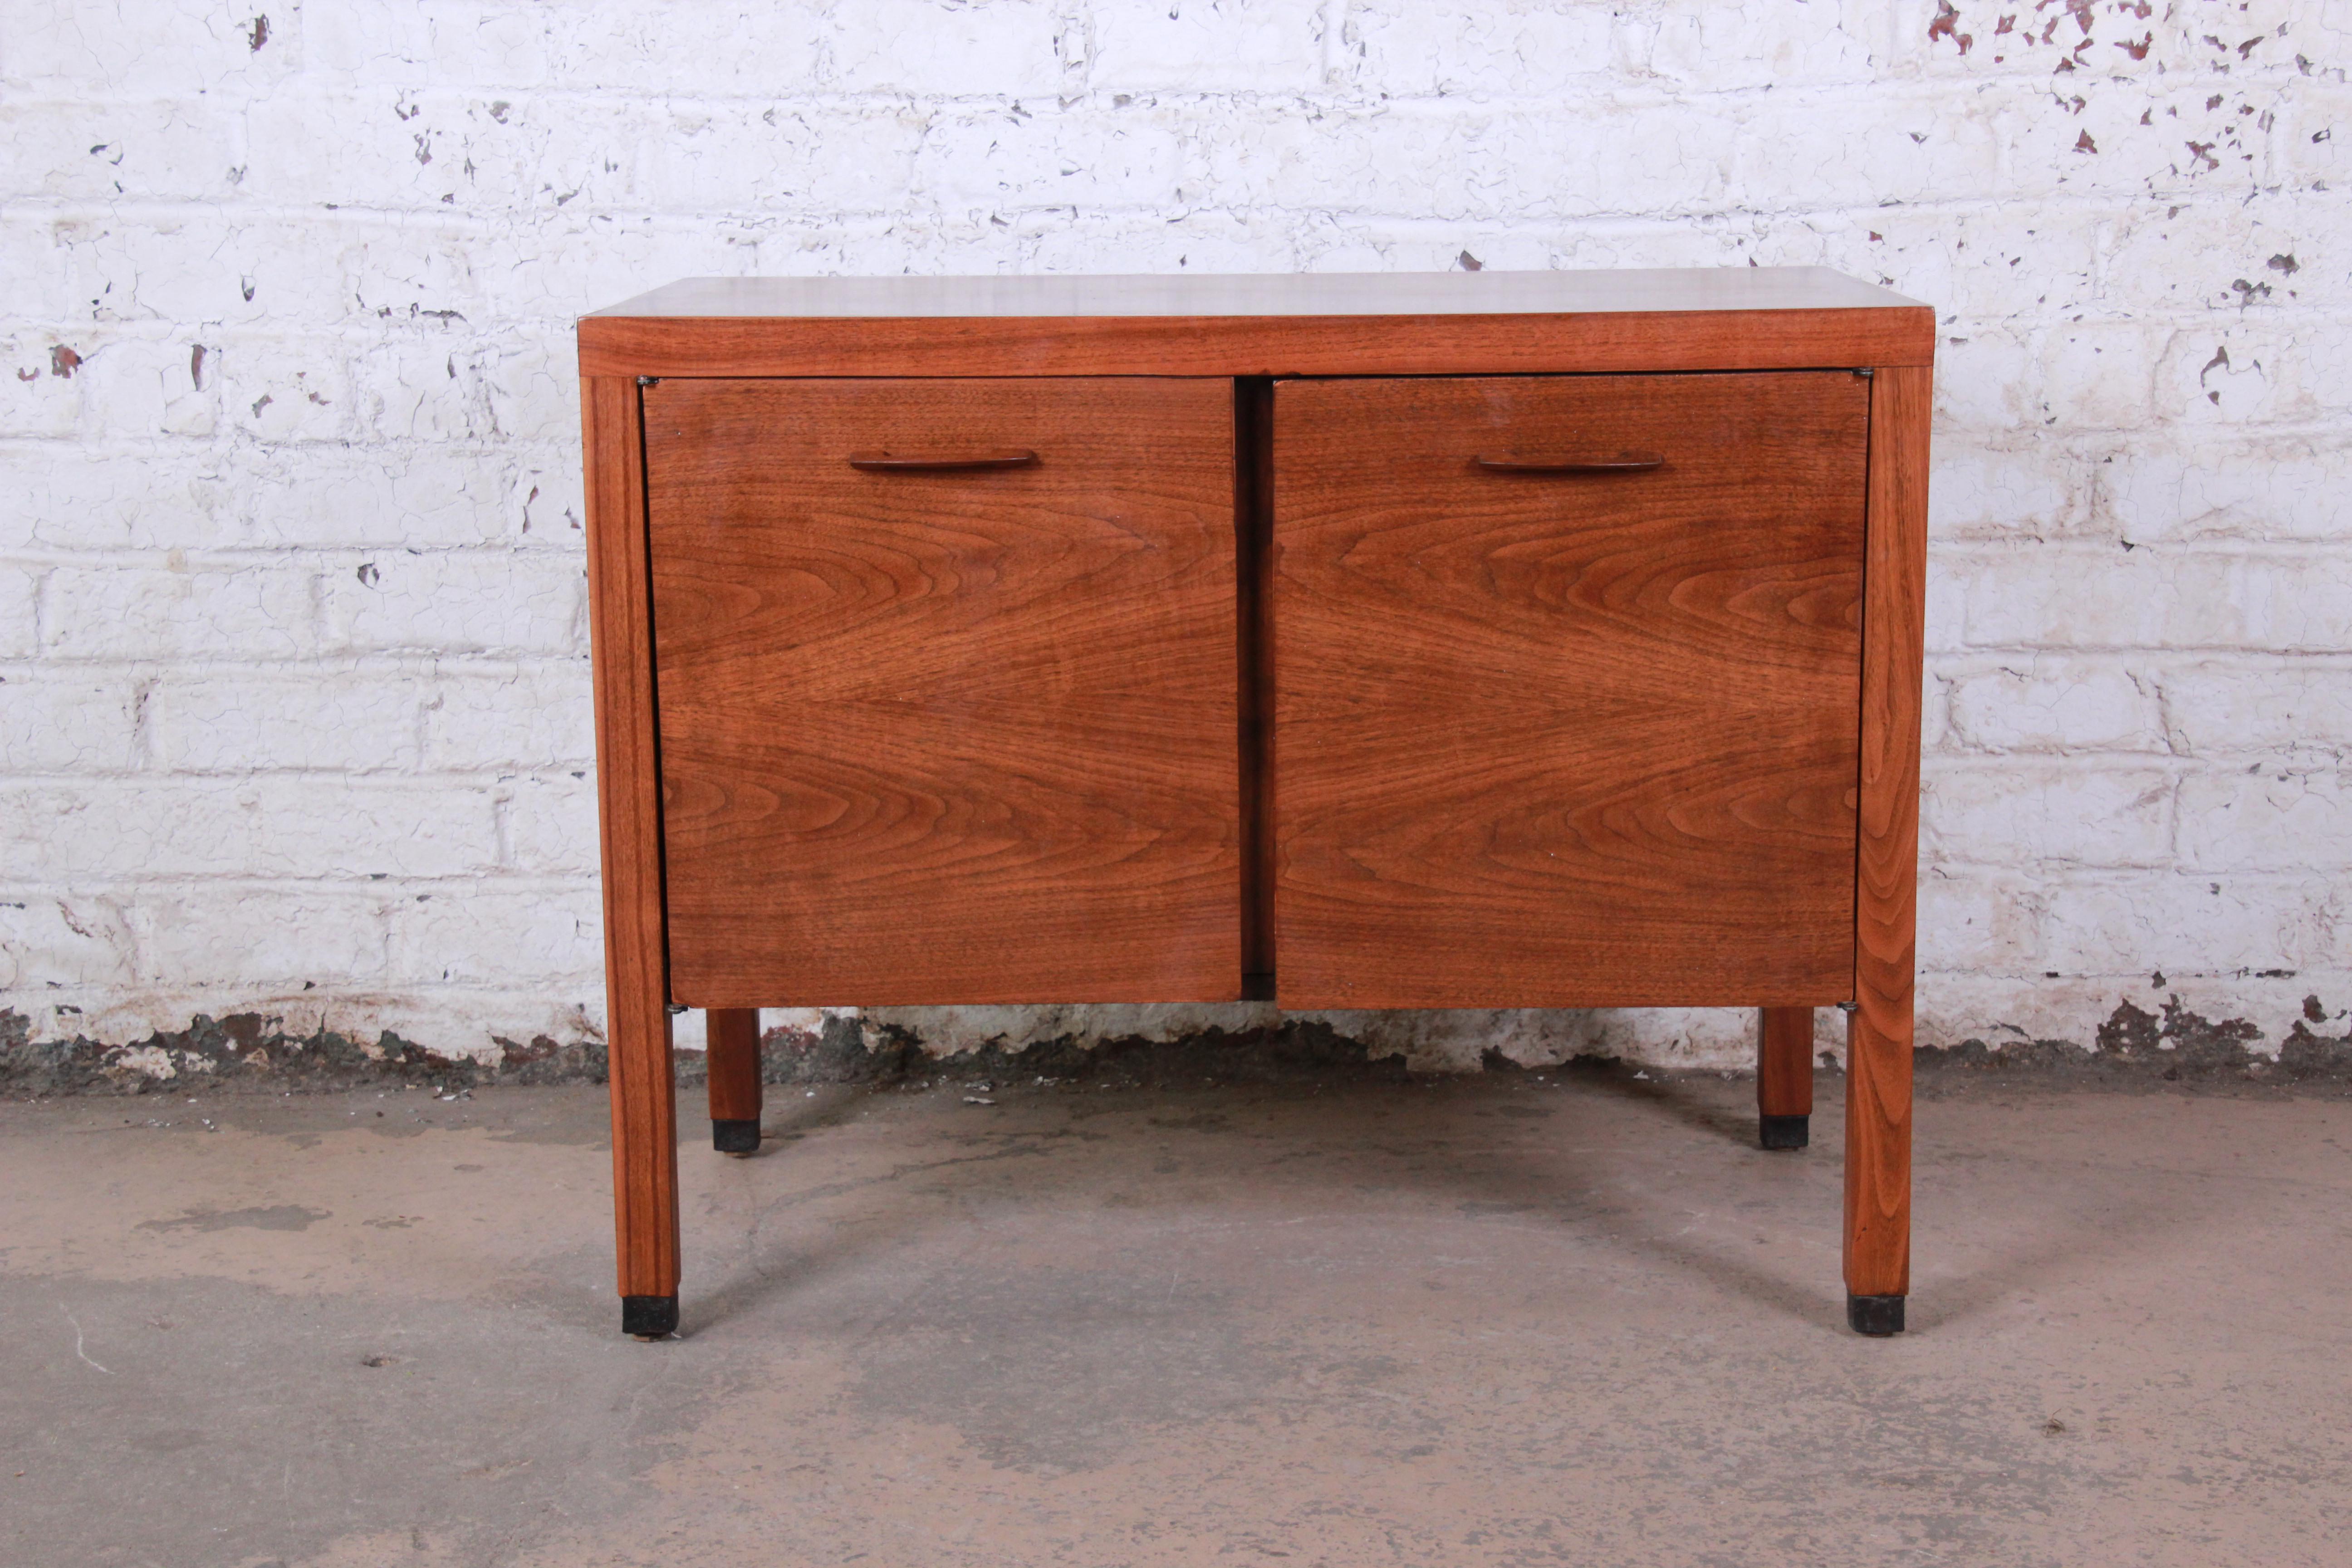 A sleek Mid-Century Modern walnut small credenza or record cabinet by Directional. The credenza features gorgeous walnut wood grain and Minimalist midcentury Danish-inspired design. It offers good storage, with two adjustable shelves behind two